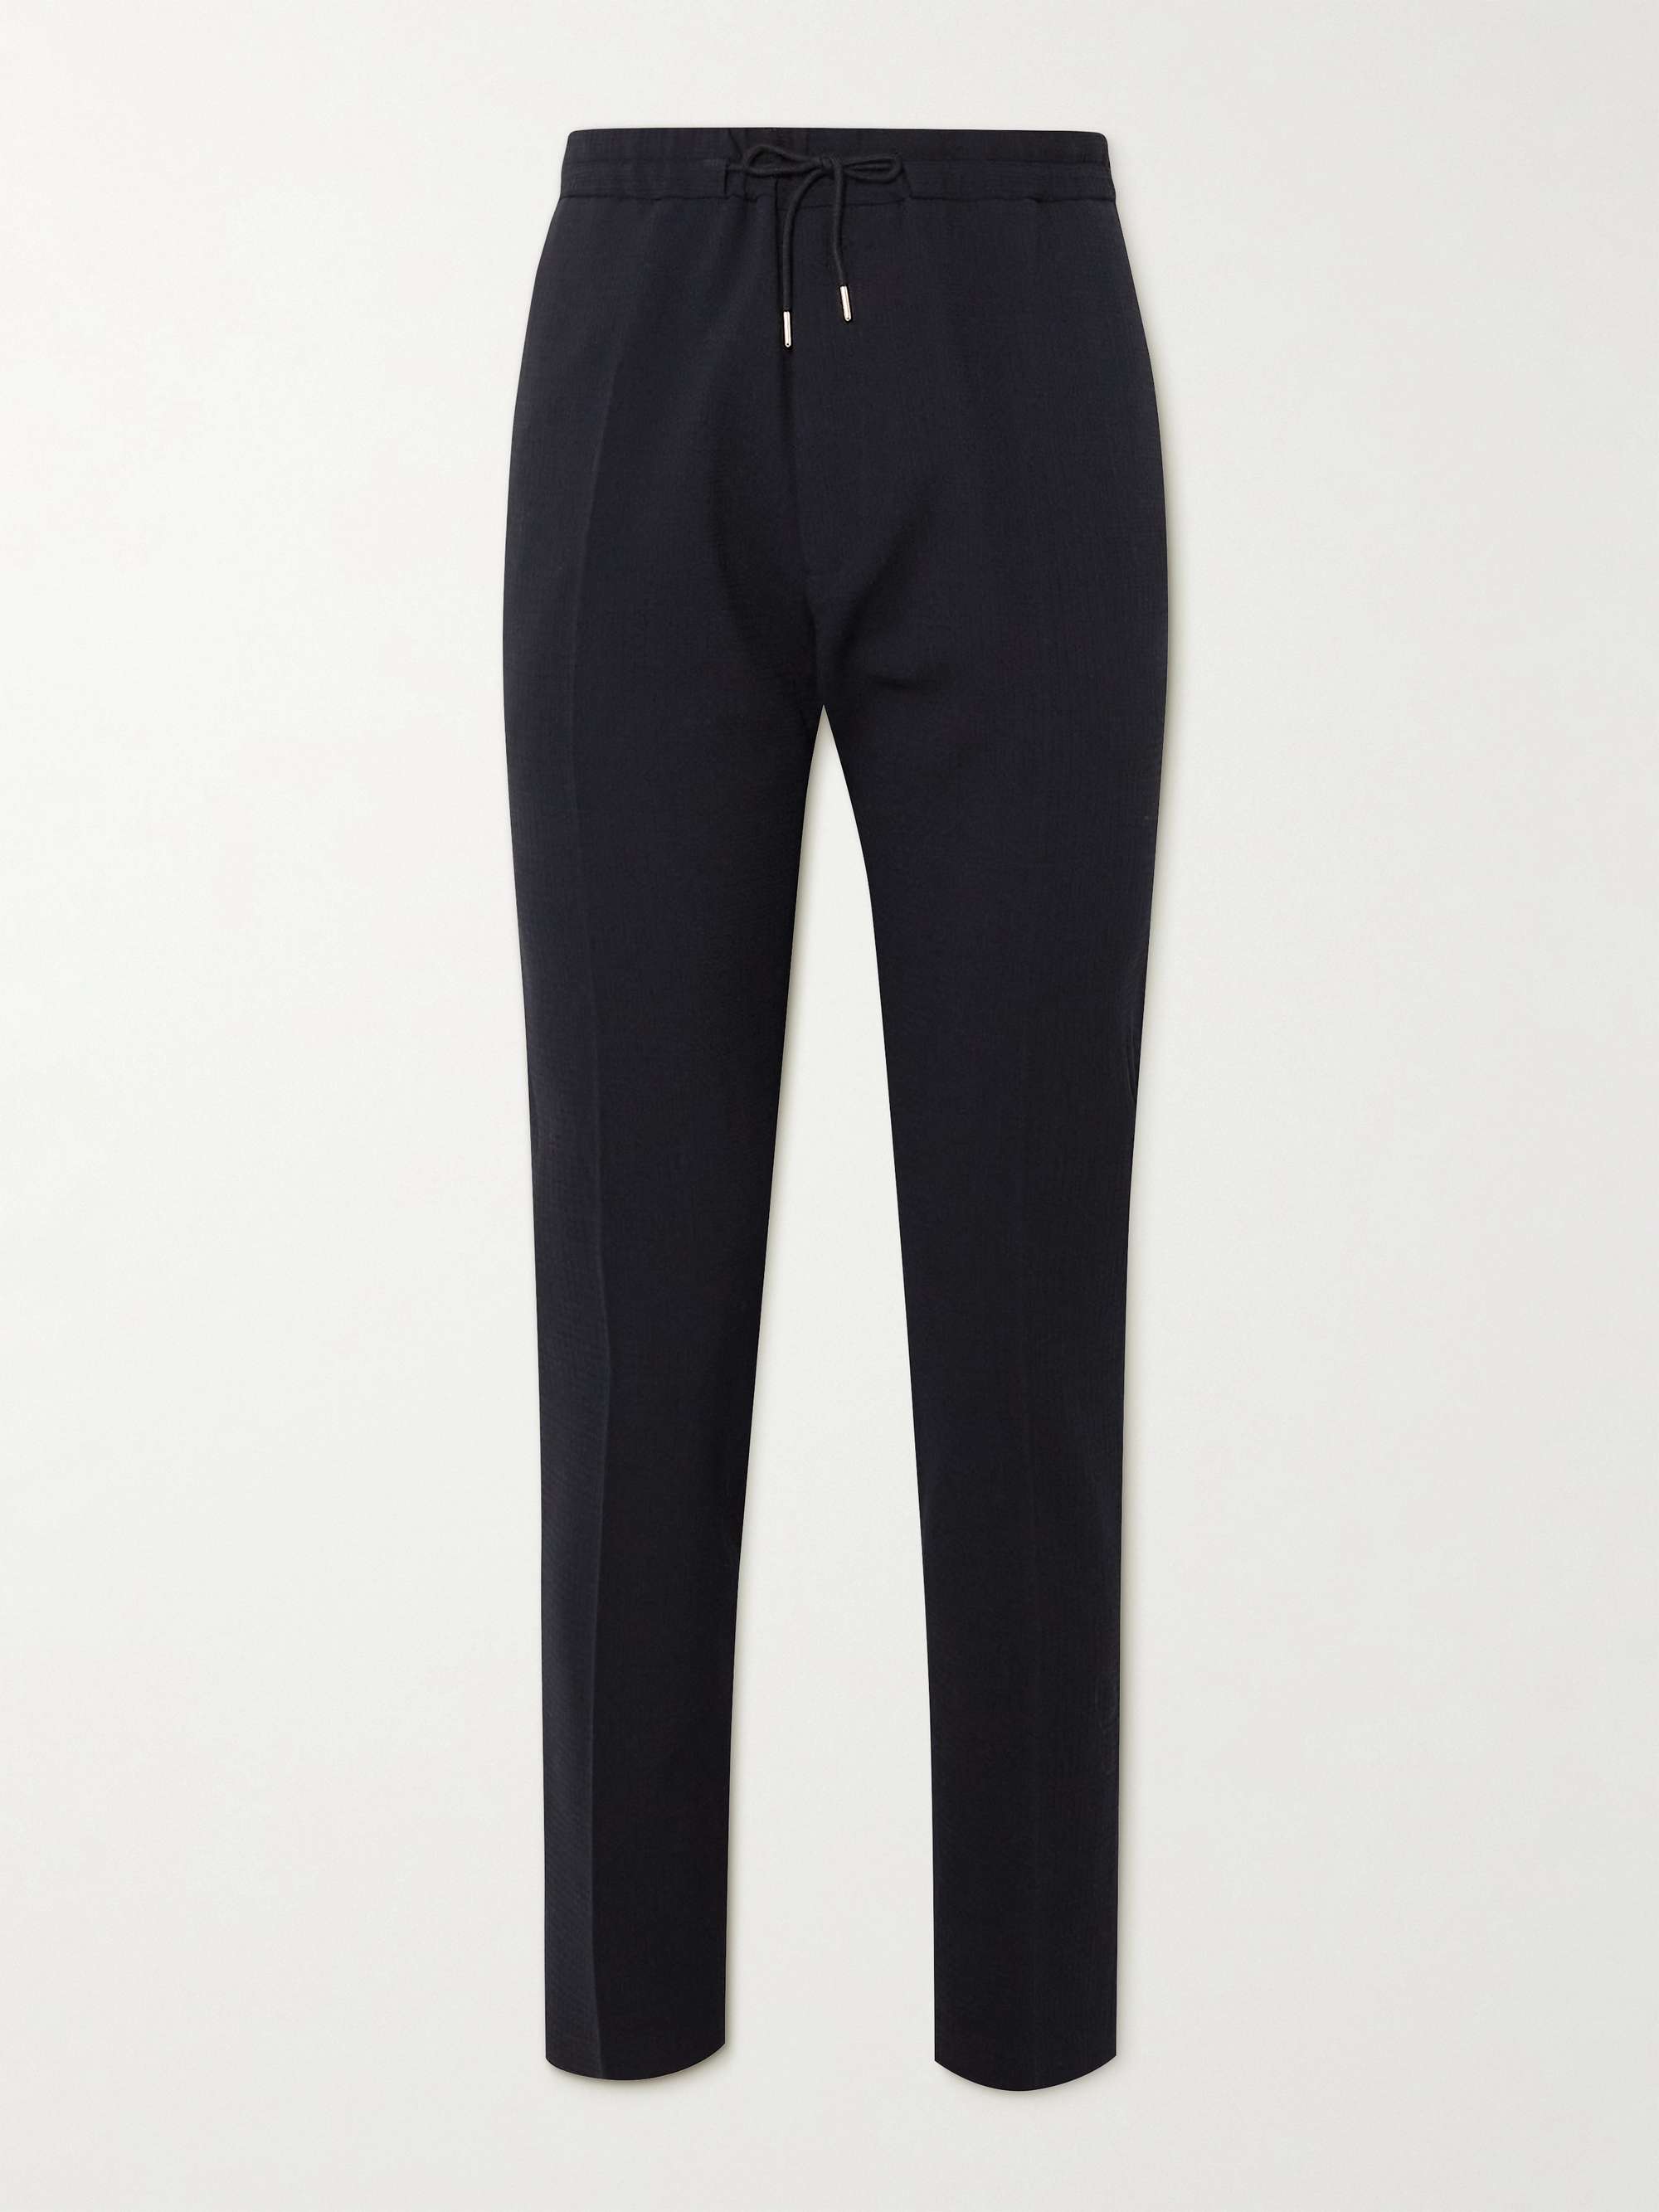 PAUL SMITH Straight-Leg Textured Wool-Blend Drawstring Suit Trousers